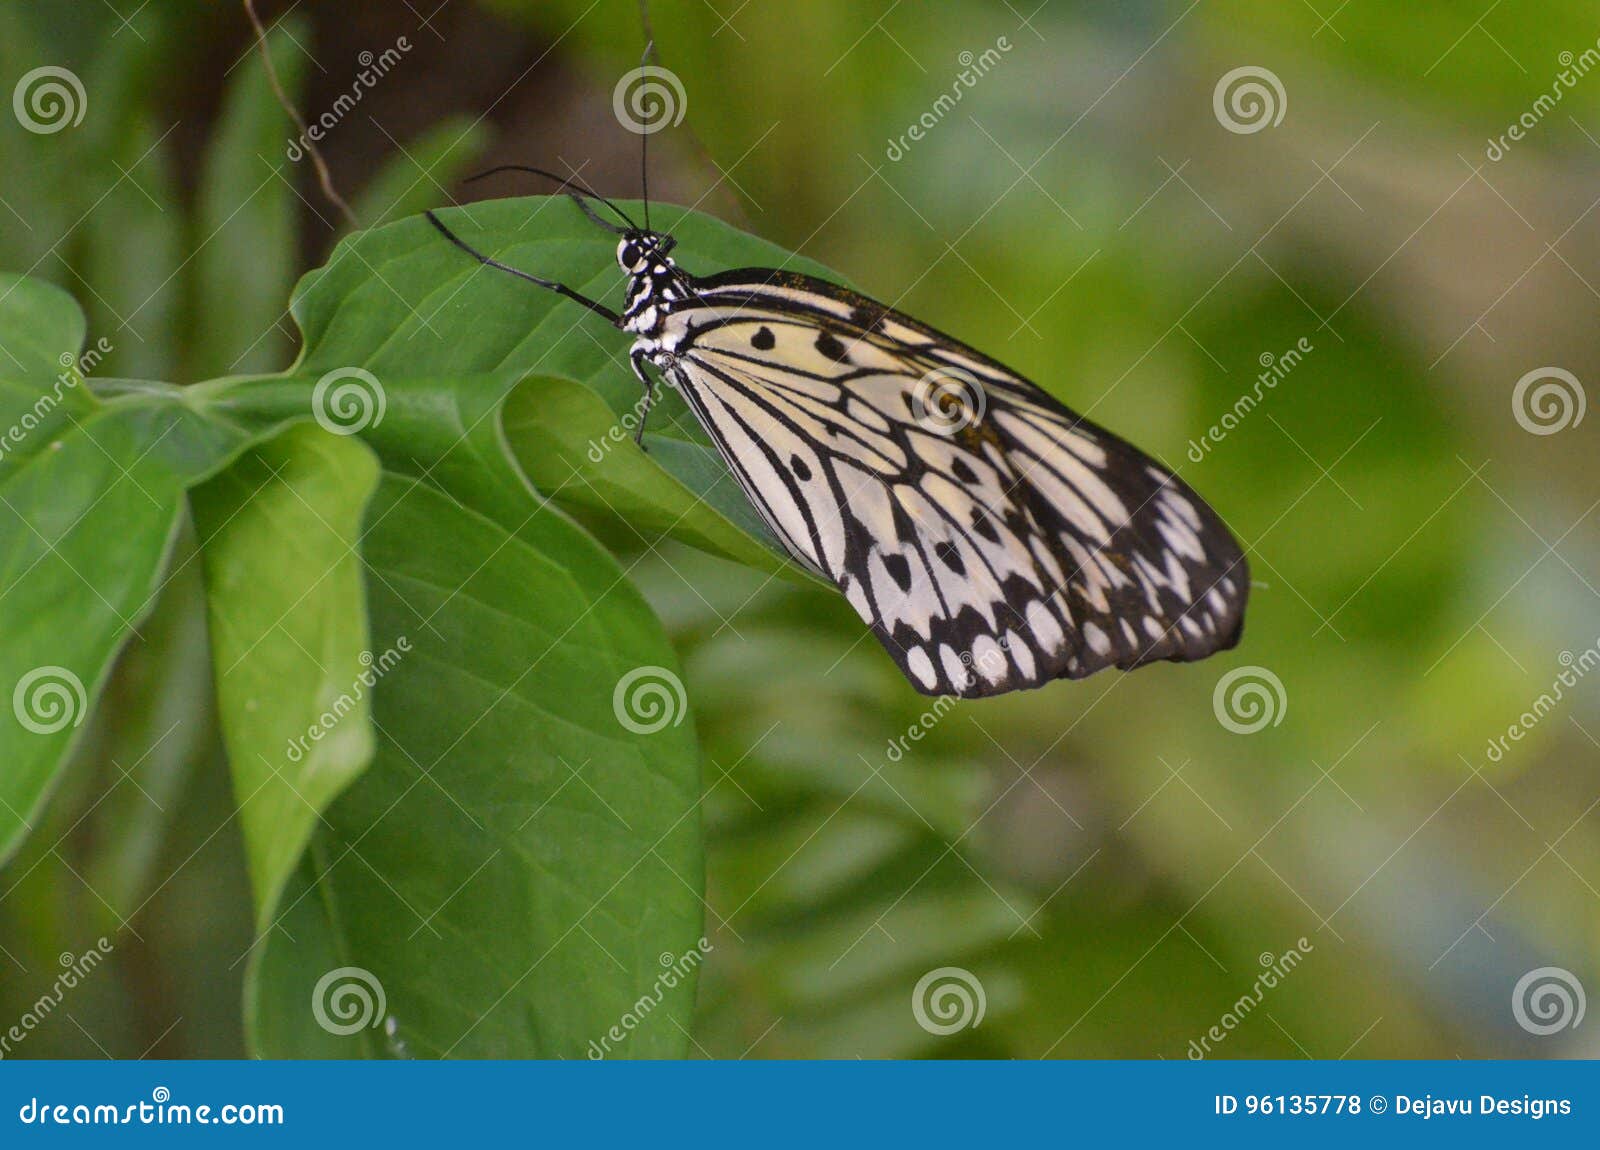 Large White Tree Nymph Butterfly on Green Foliage Stock Photo - Image ...